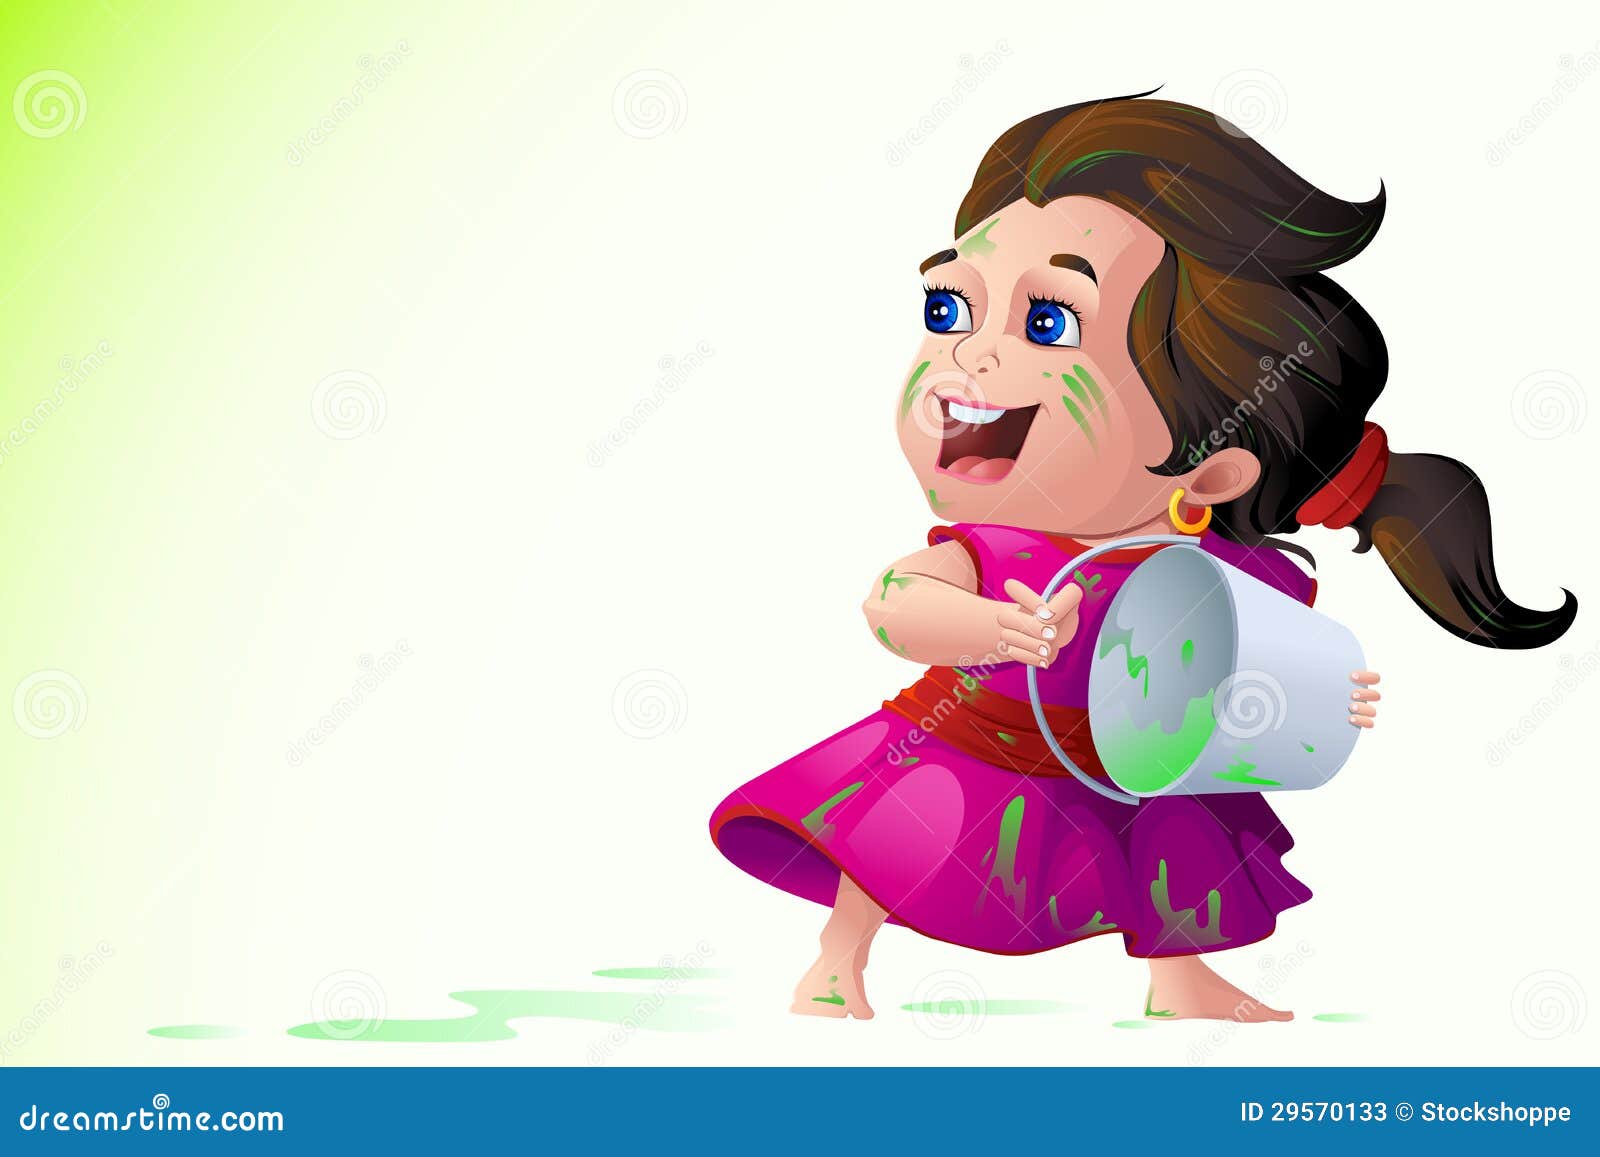 Kids playing Holi Festival stock vector. Illustration of clothes - 29570133